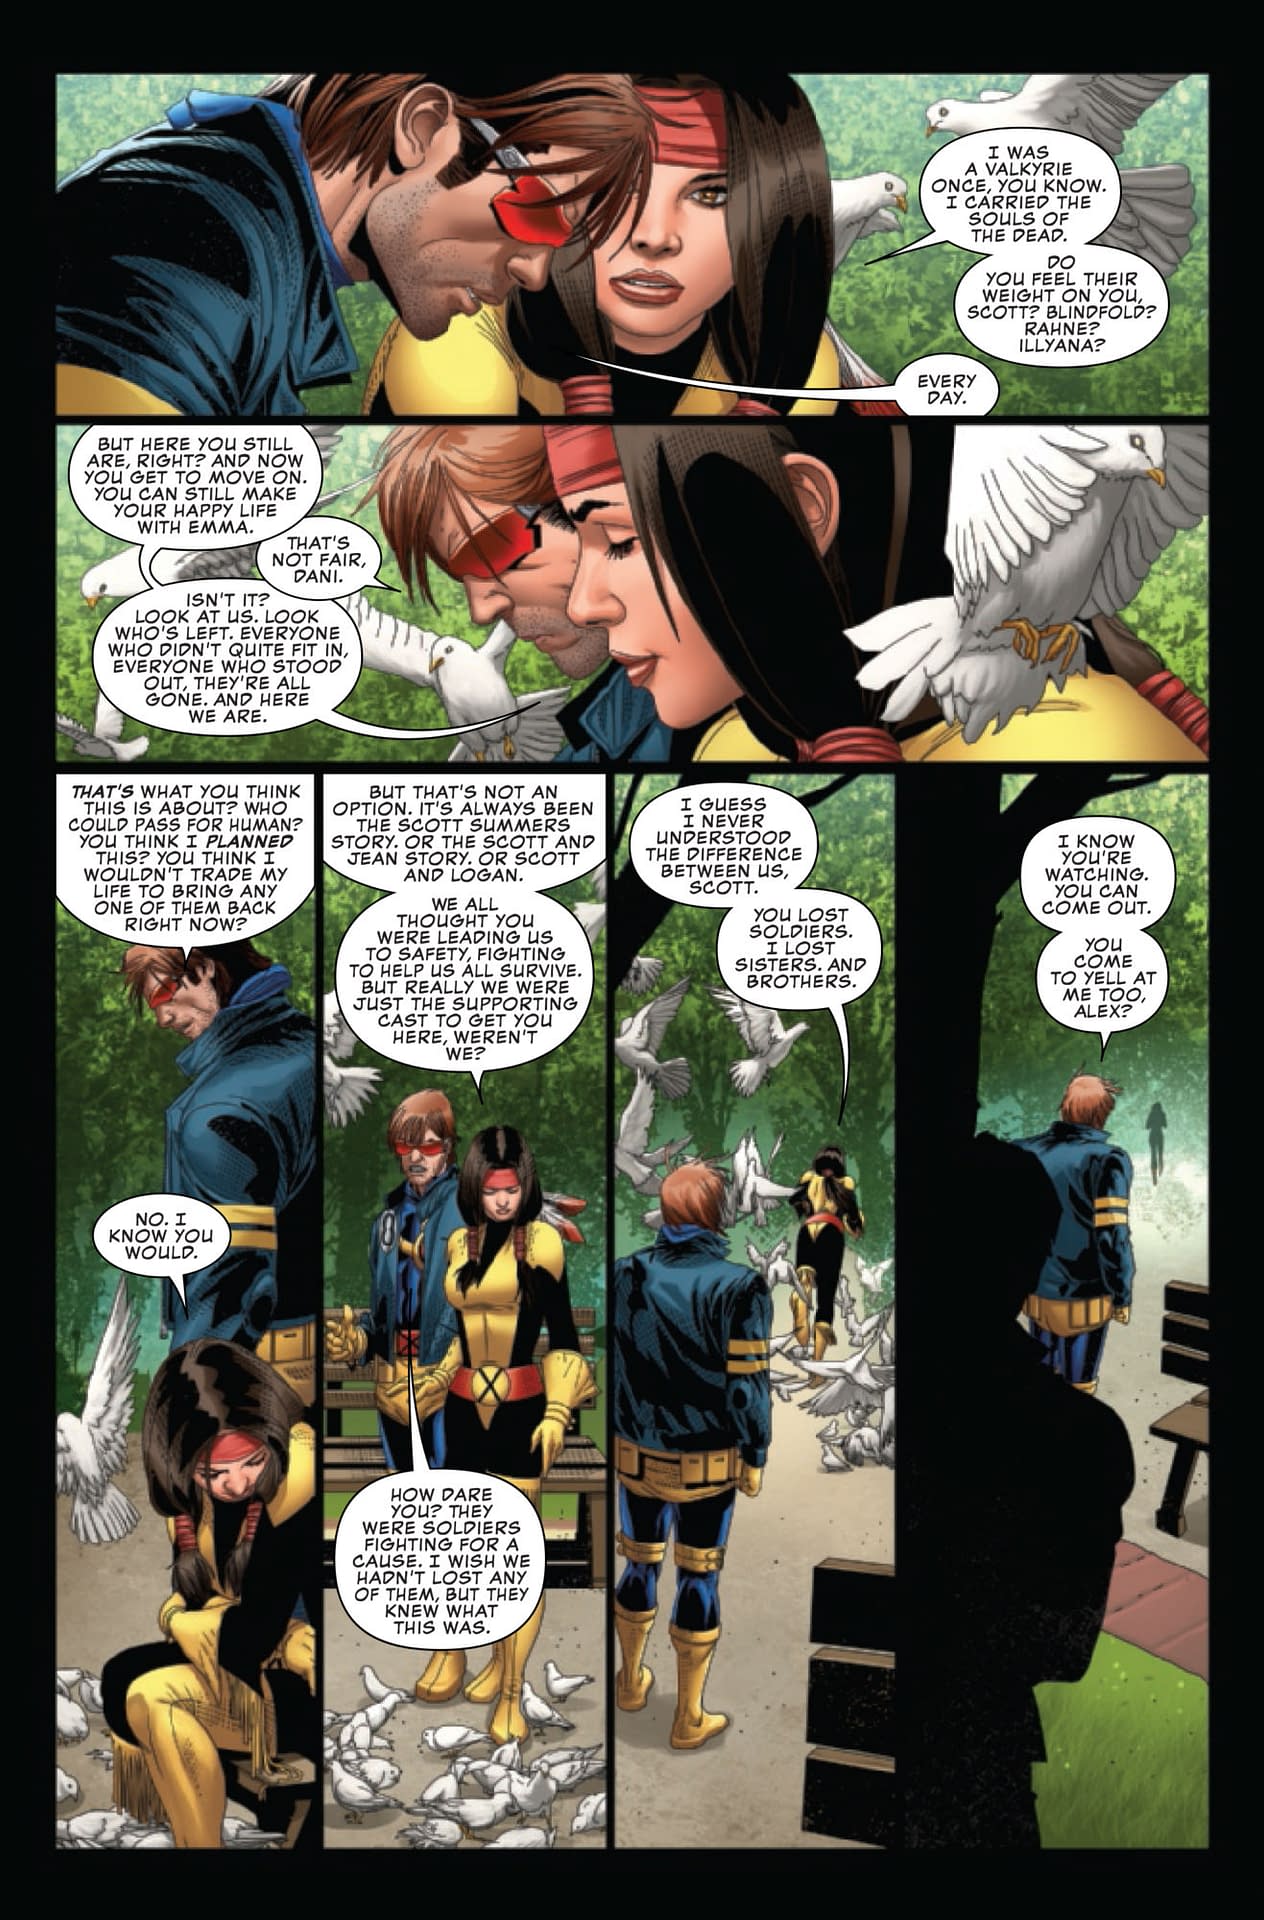 Uncanny X-Men #22: Blaming Cyclops for Everything [Preview]